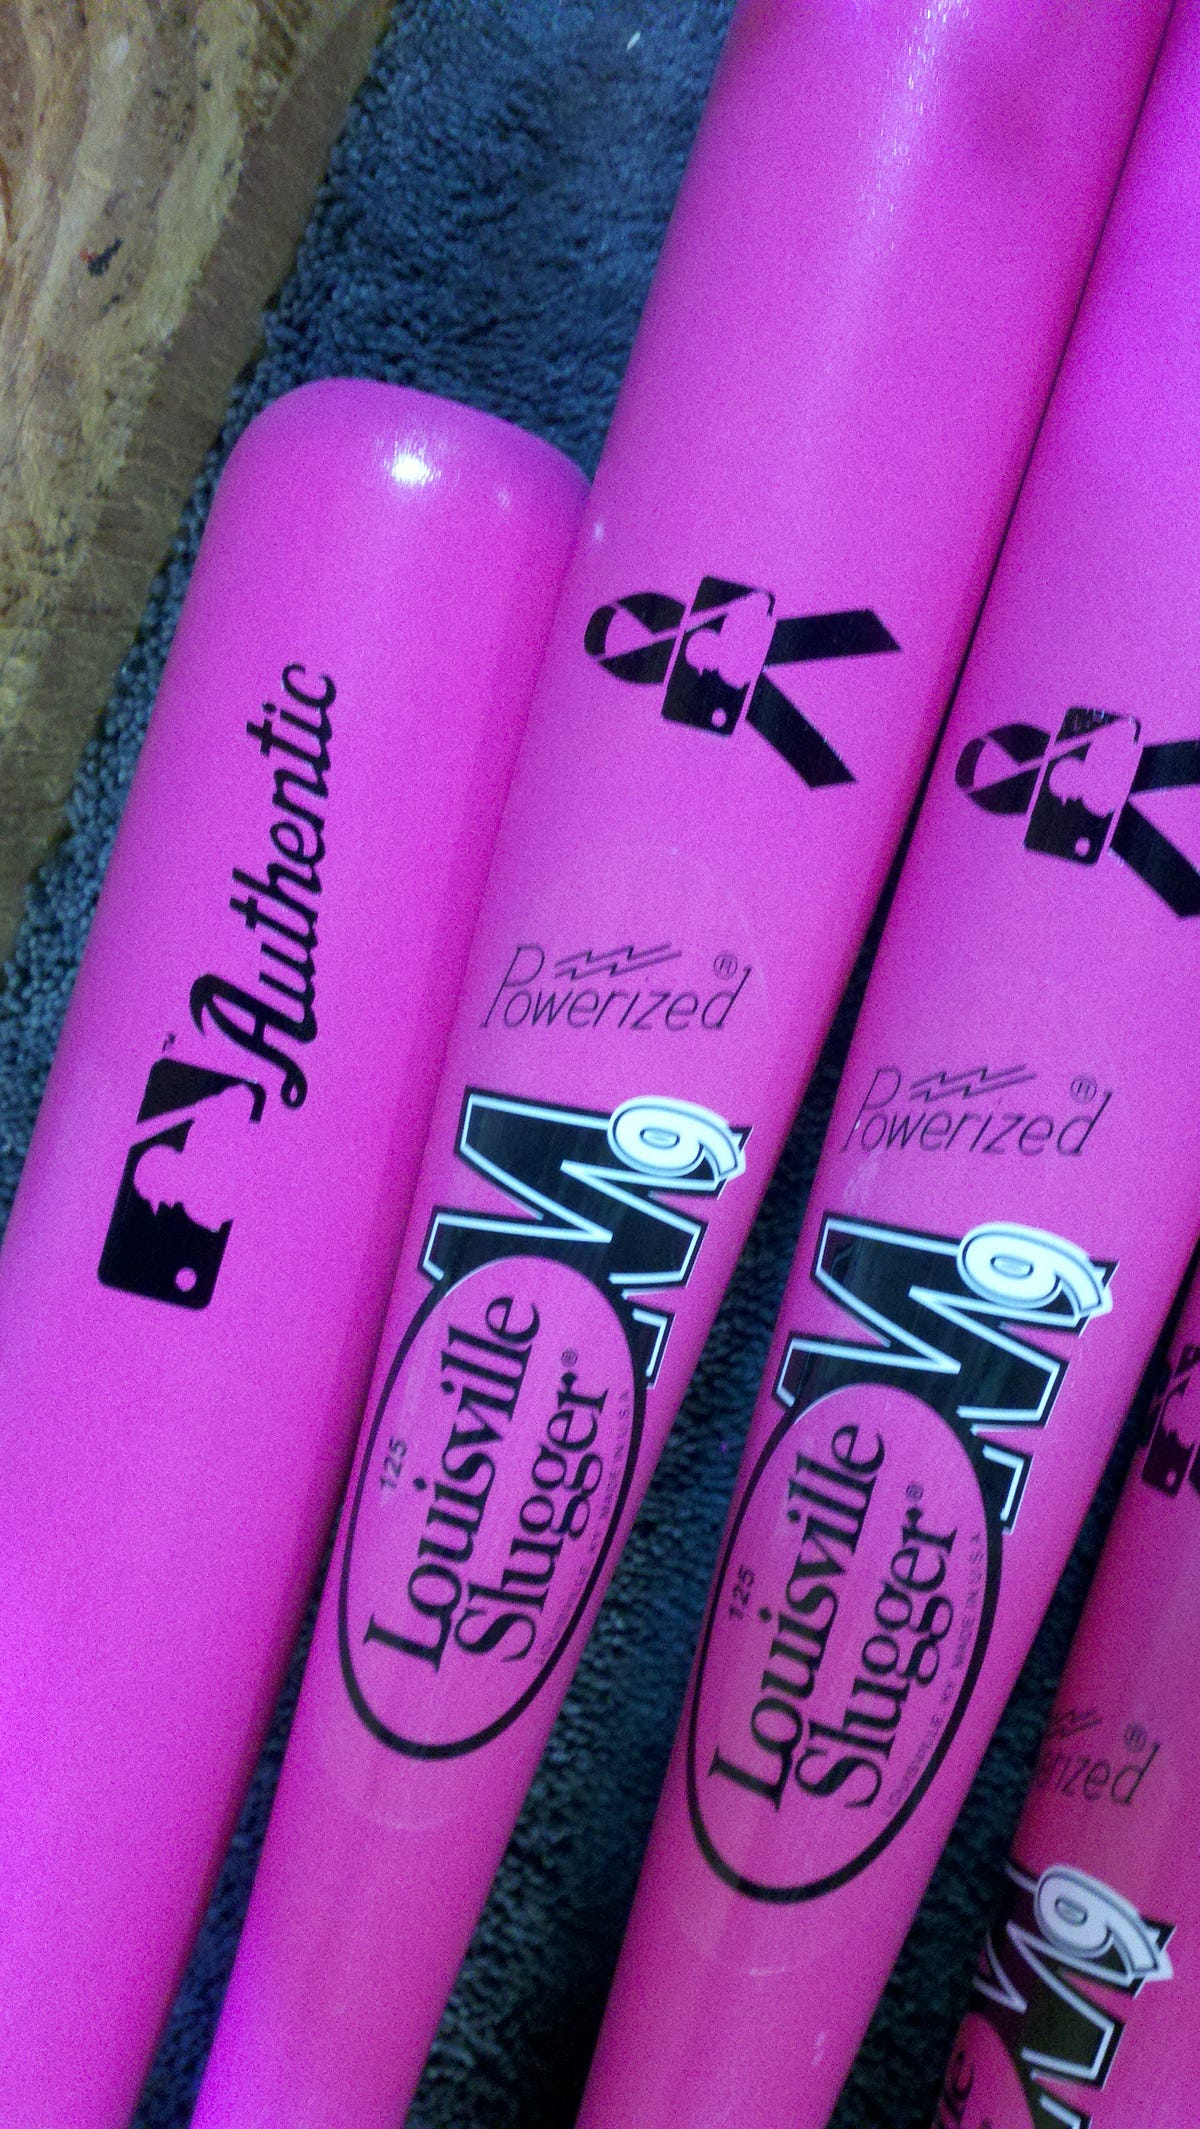 Pink newspapers? Pink baseball bats? The Power of Pink is